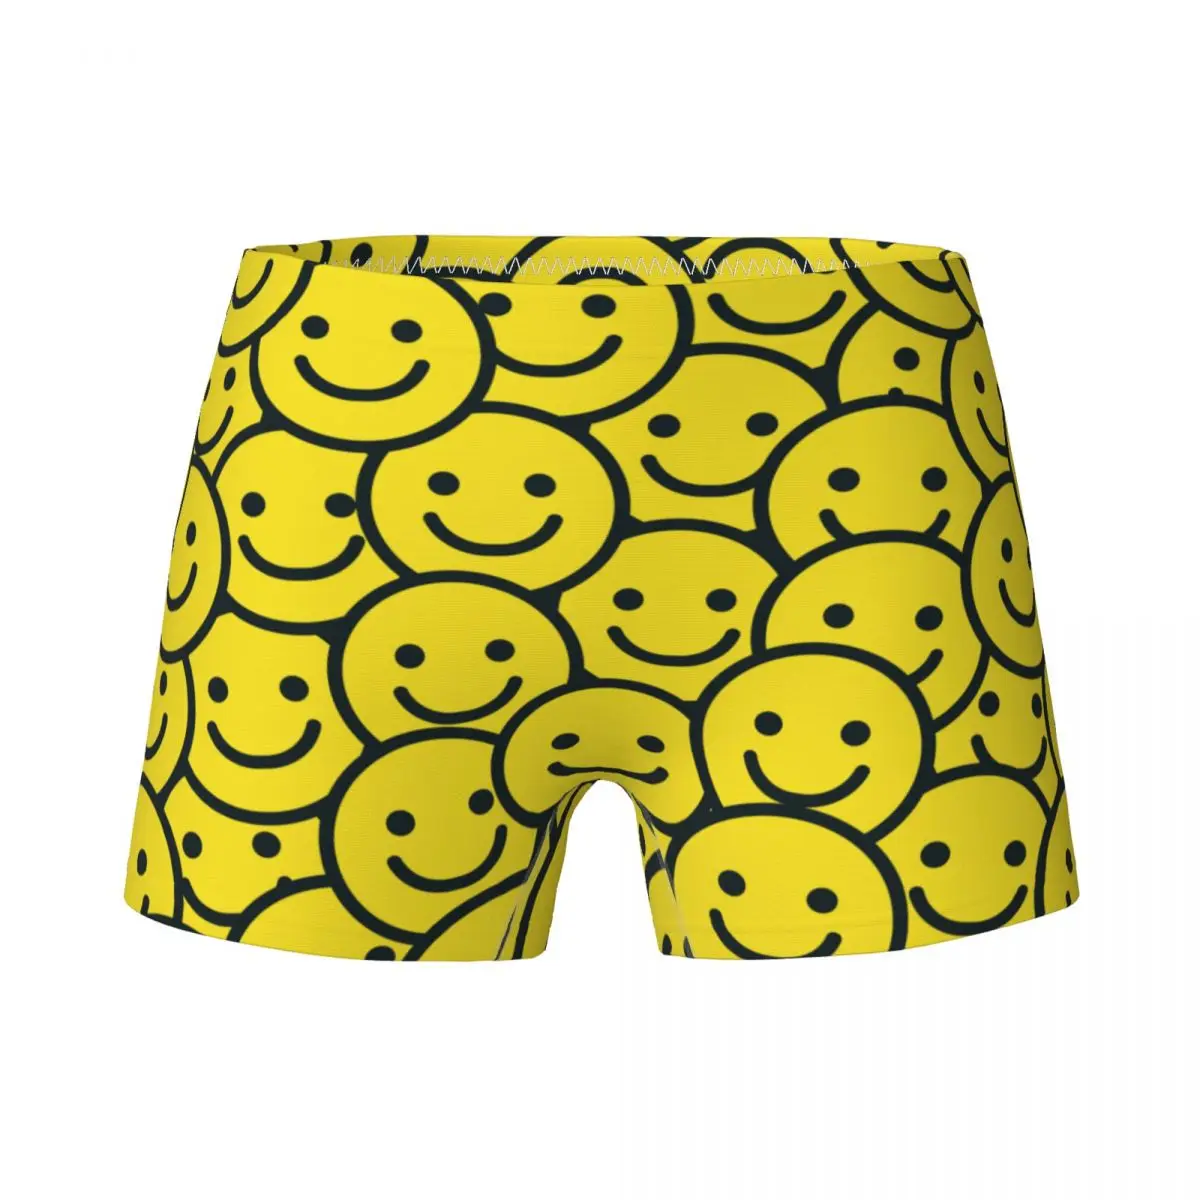 

Youth Girls Smiling Pattern Boxer Child Pure Cotton Pretty Underwear Kids Teenagers Underpants Breathable Shorts For 4-15Y